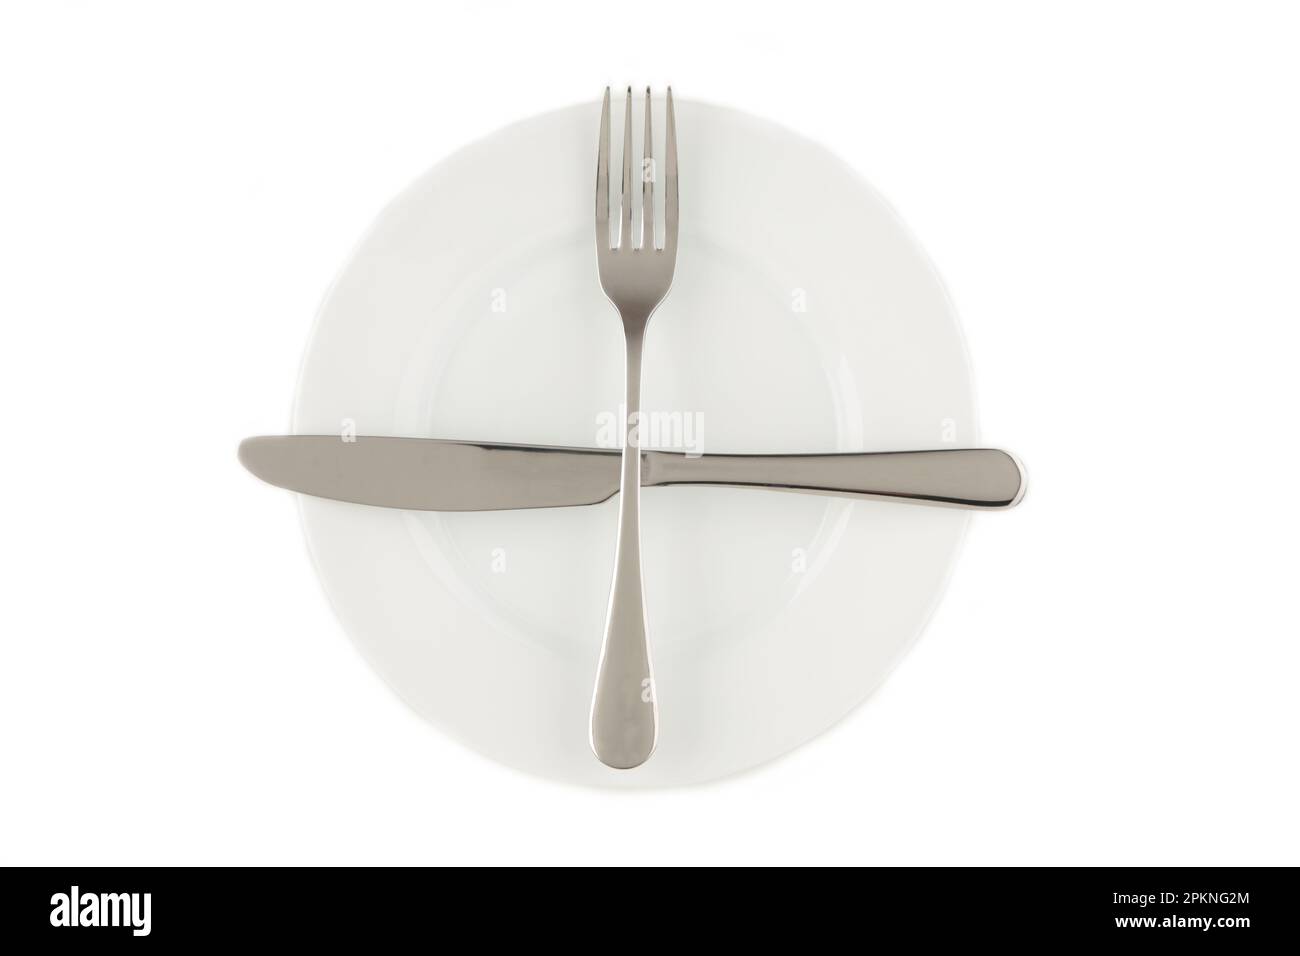 Ready for second plate. Dining etiquette. Table manner. Knife and fork sign. Set of foto 3 from 7. Top view Stock Photo